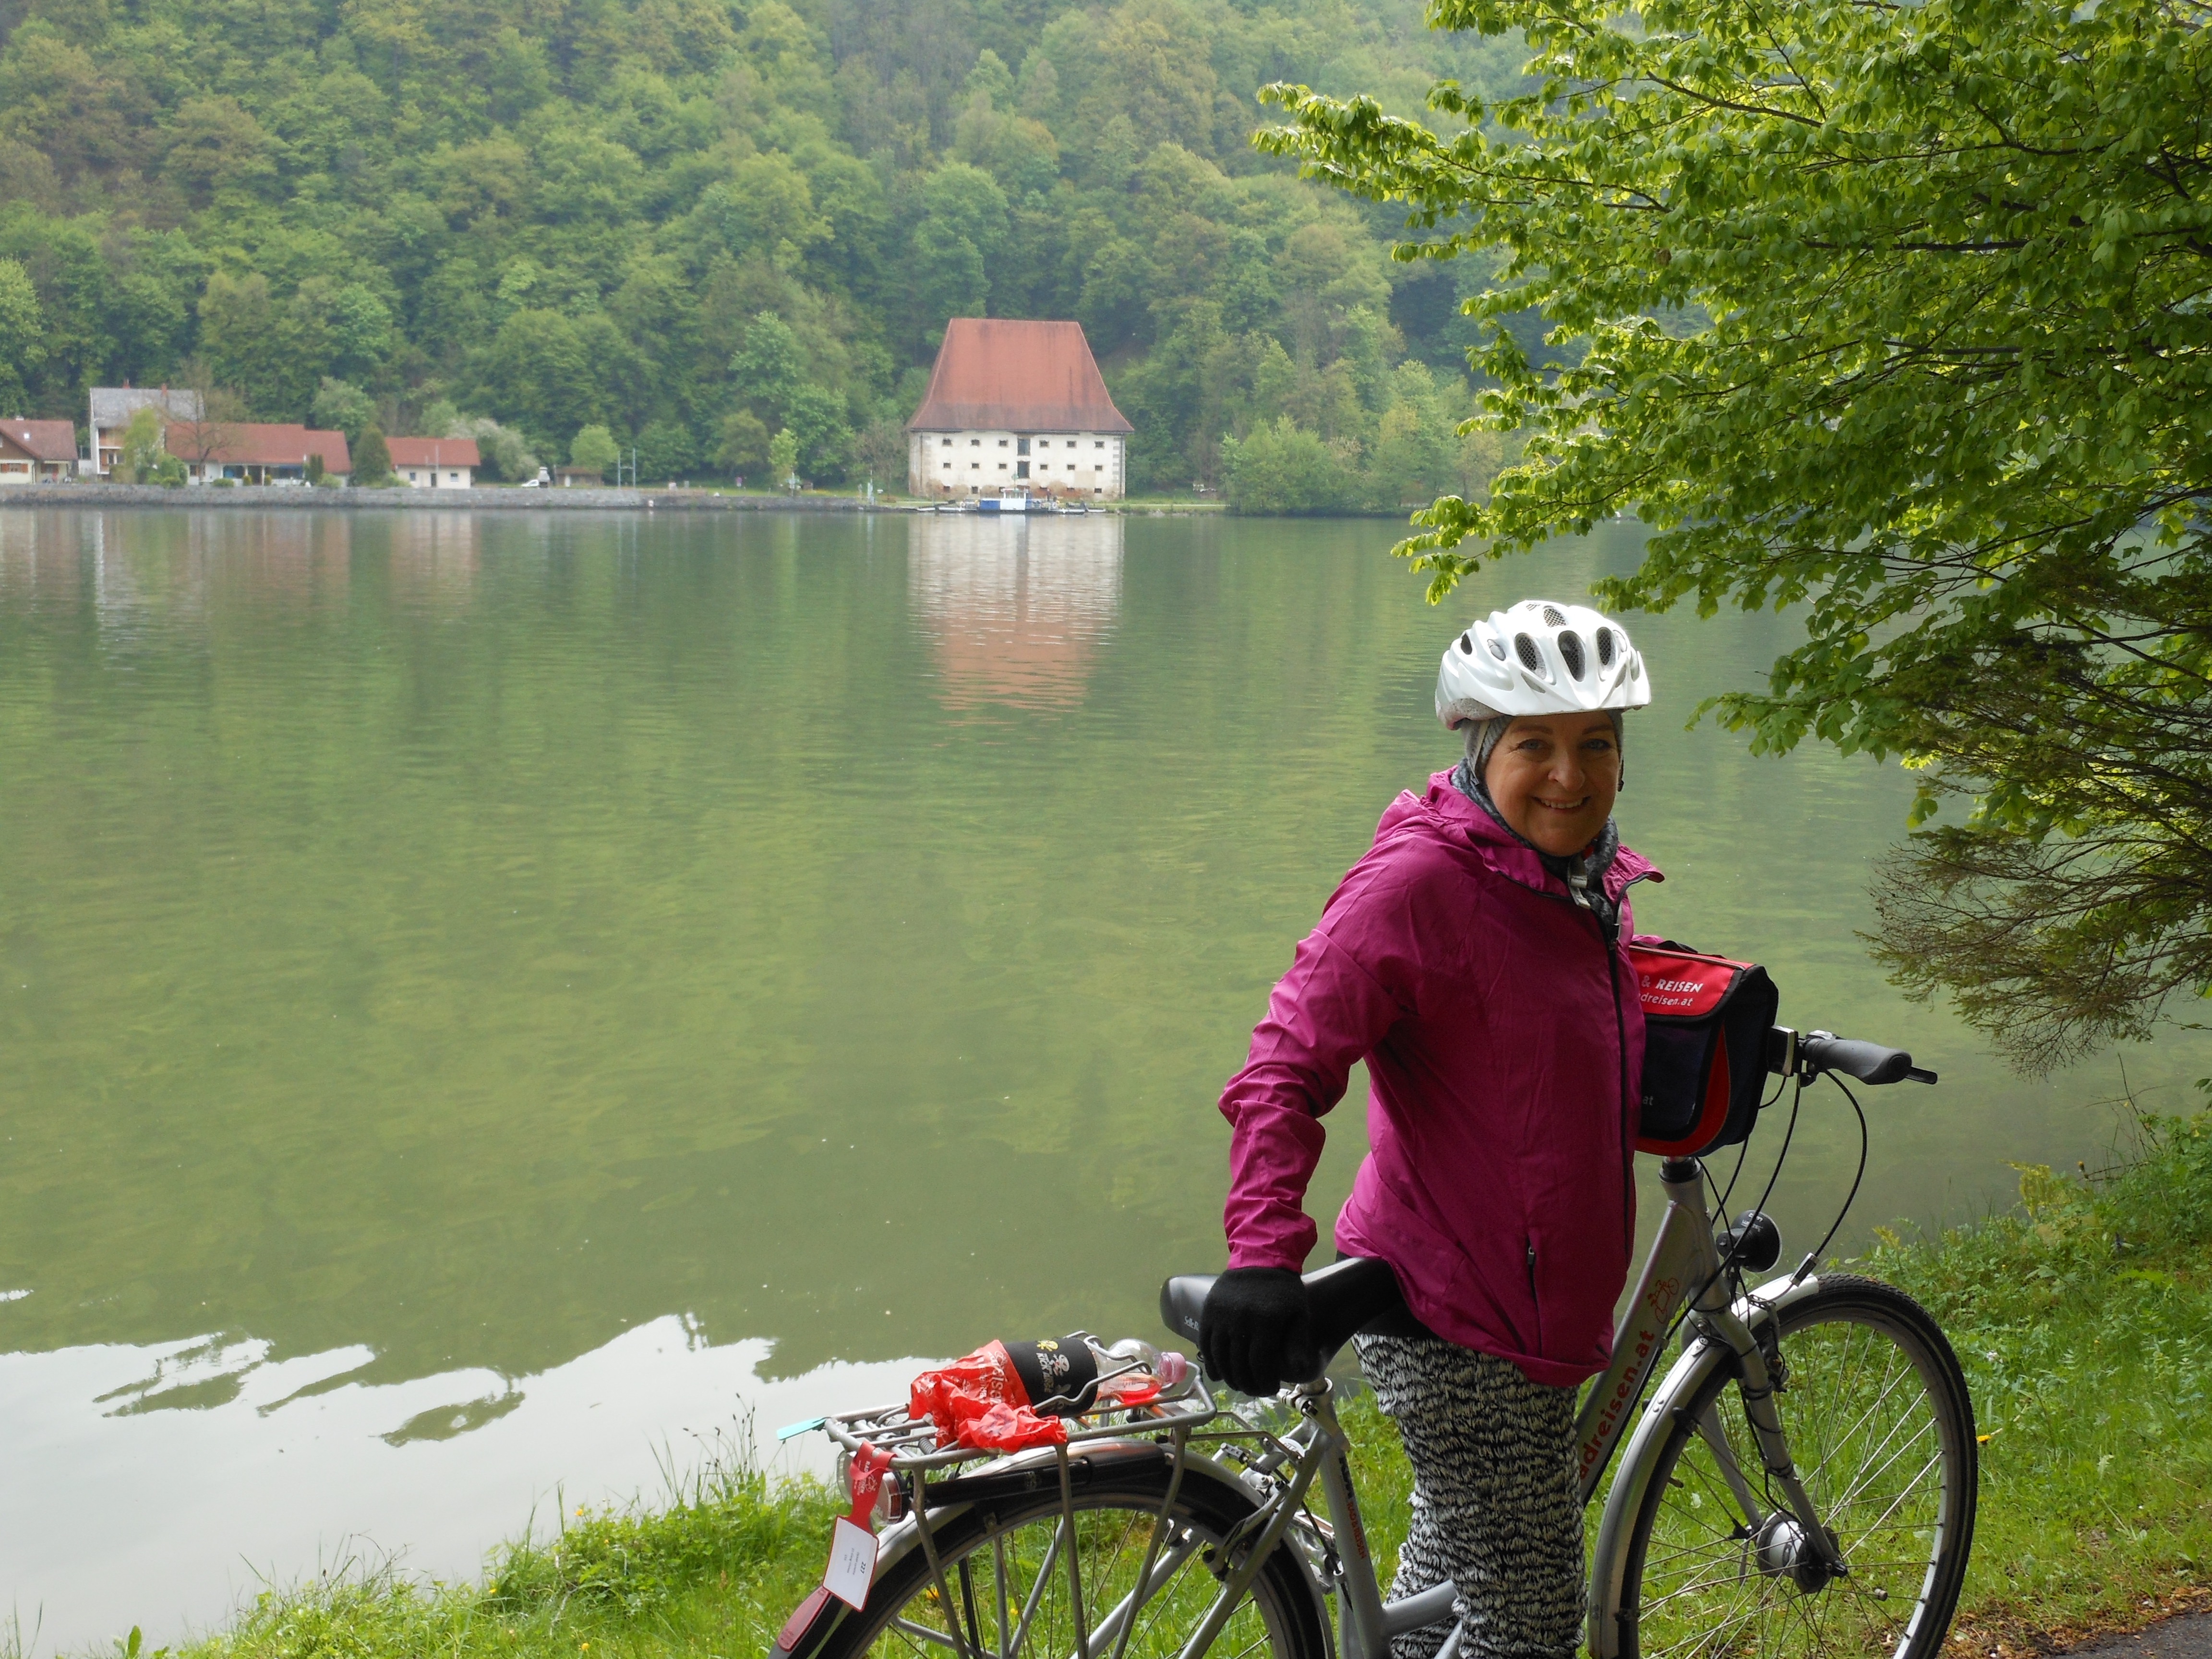 Lynette with the beautiful Danube valley in the background.